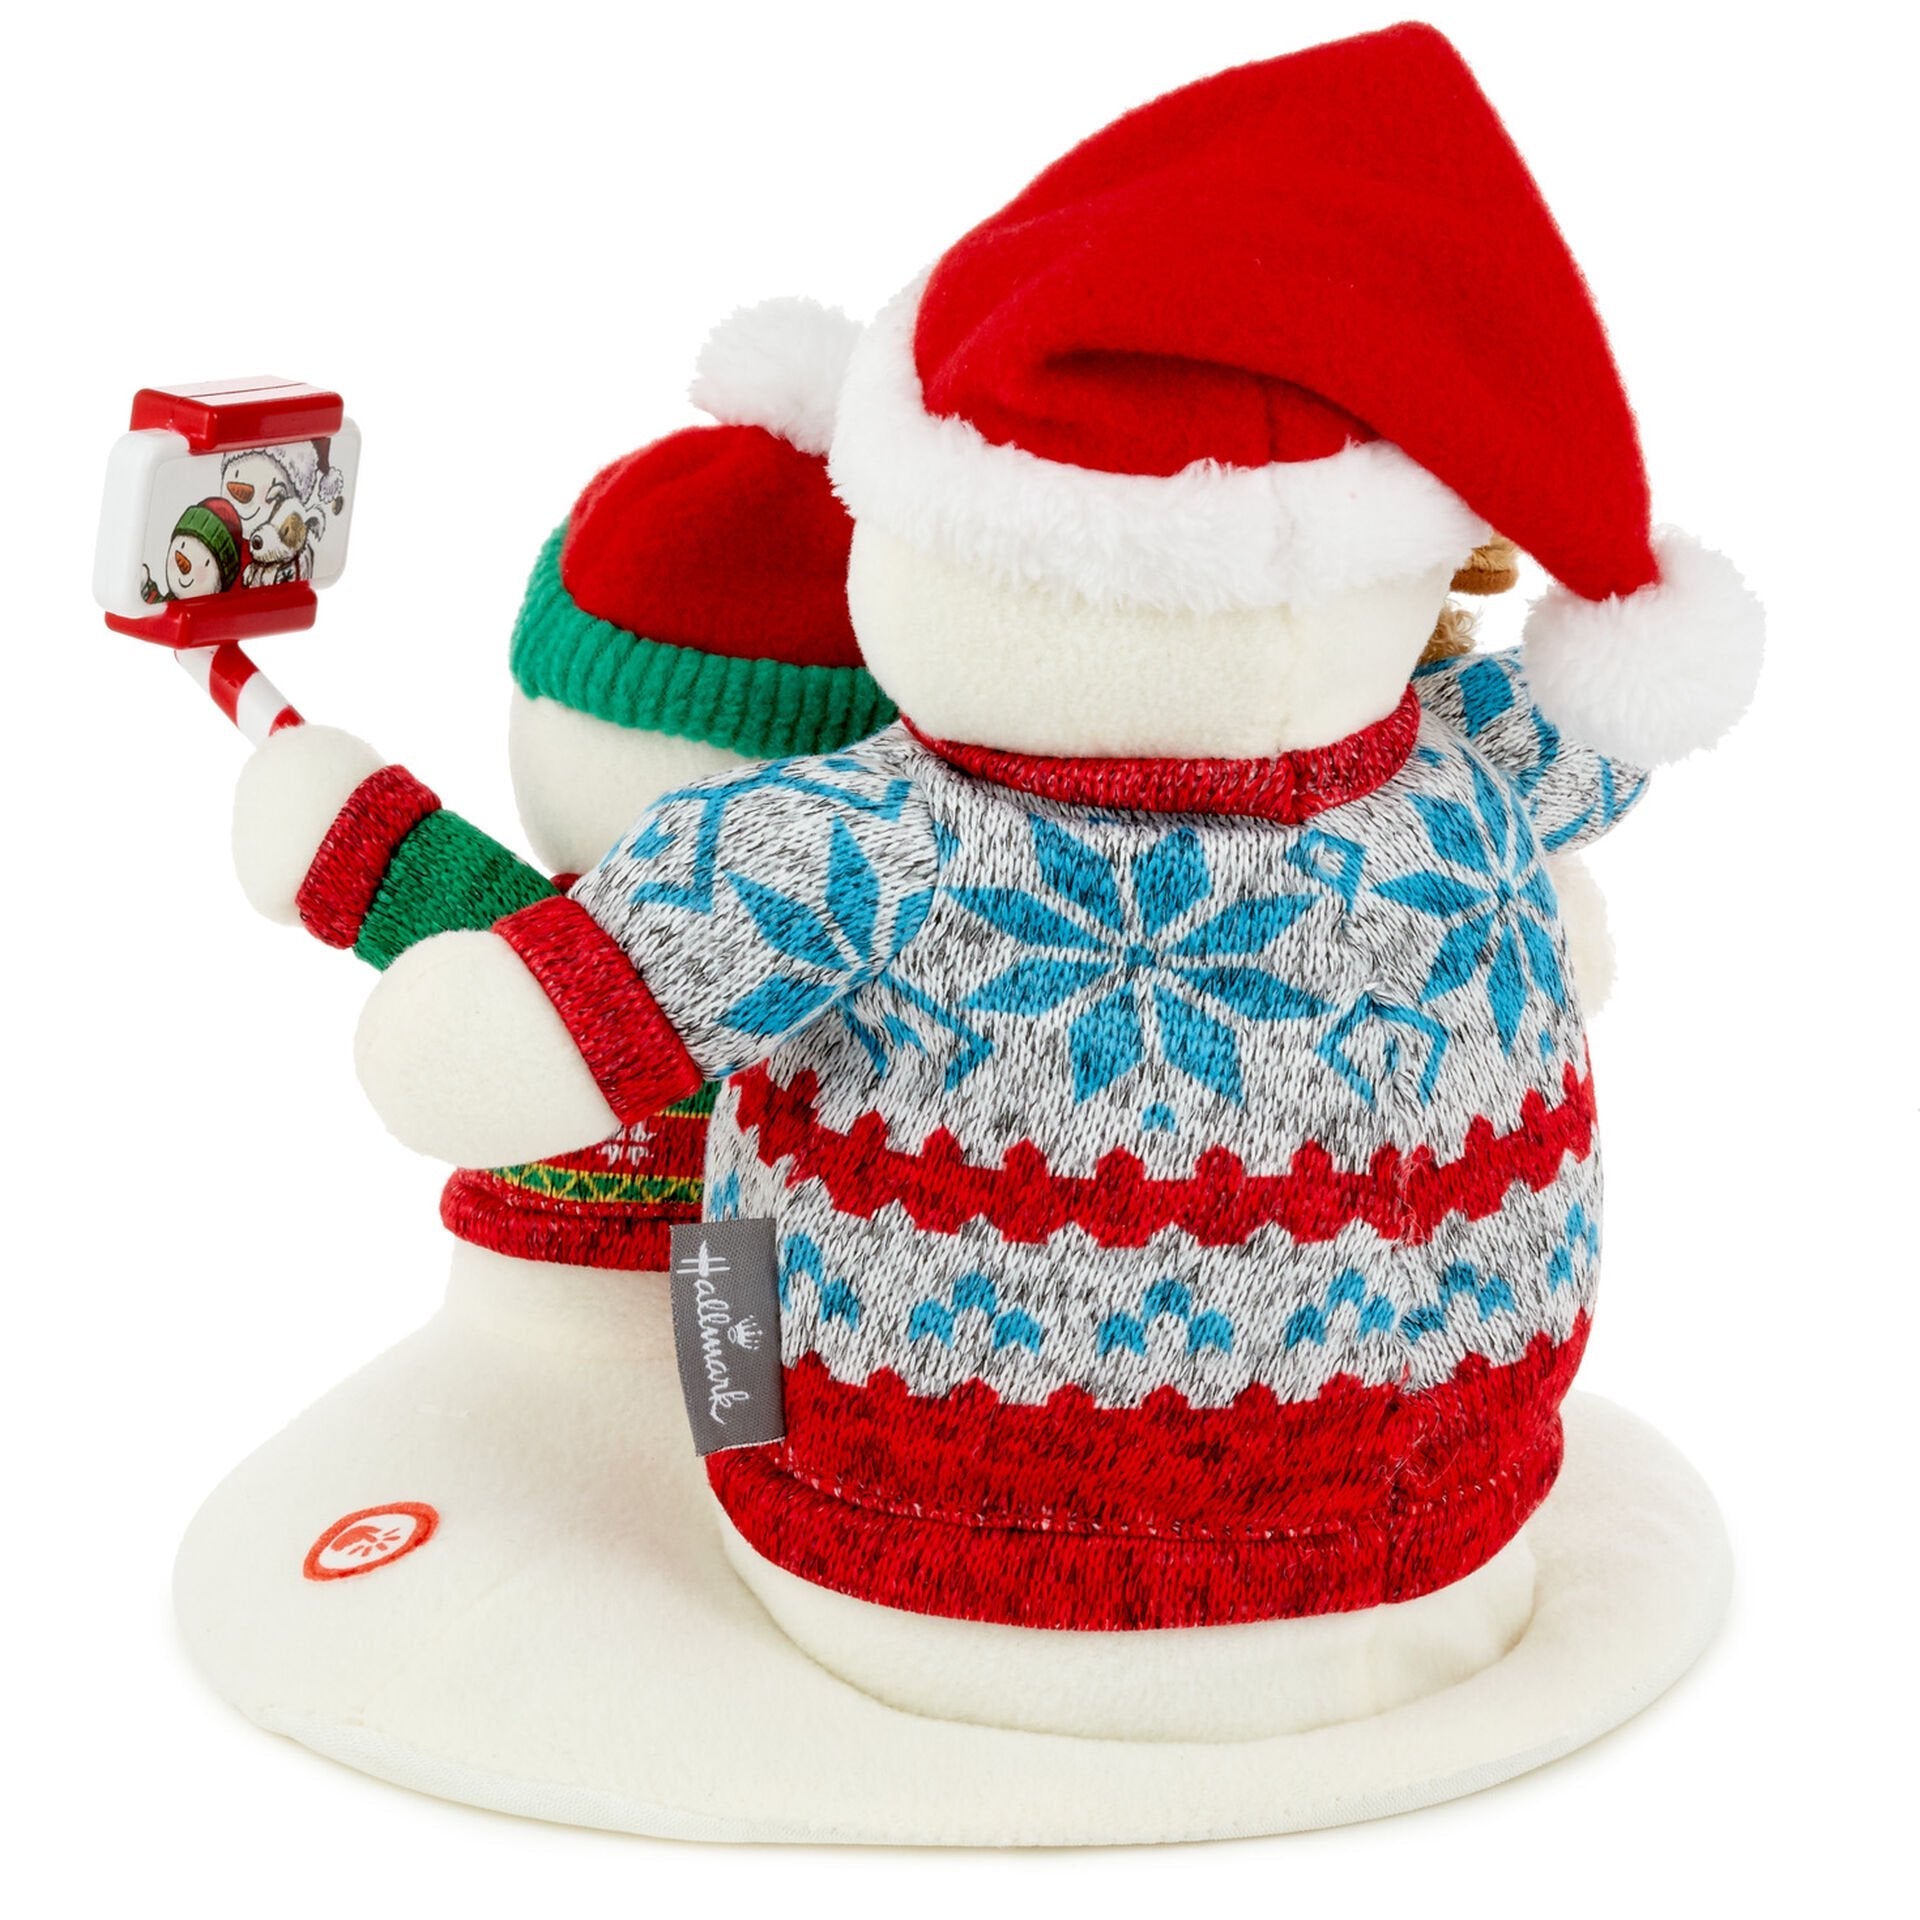 Cozy Christmas Selfie Techno Snowman Singing Stuffed Animal With Light and Motion, 9.5"